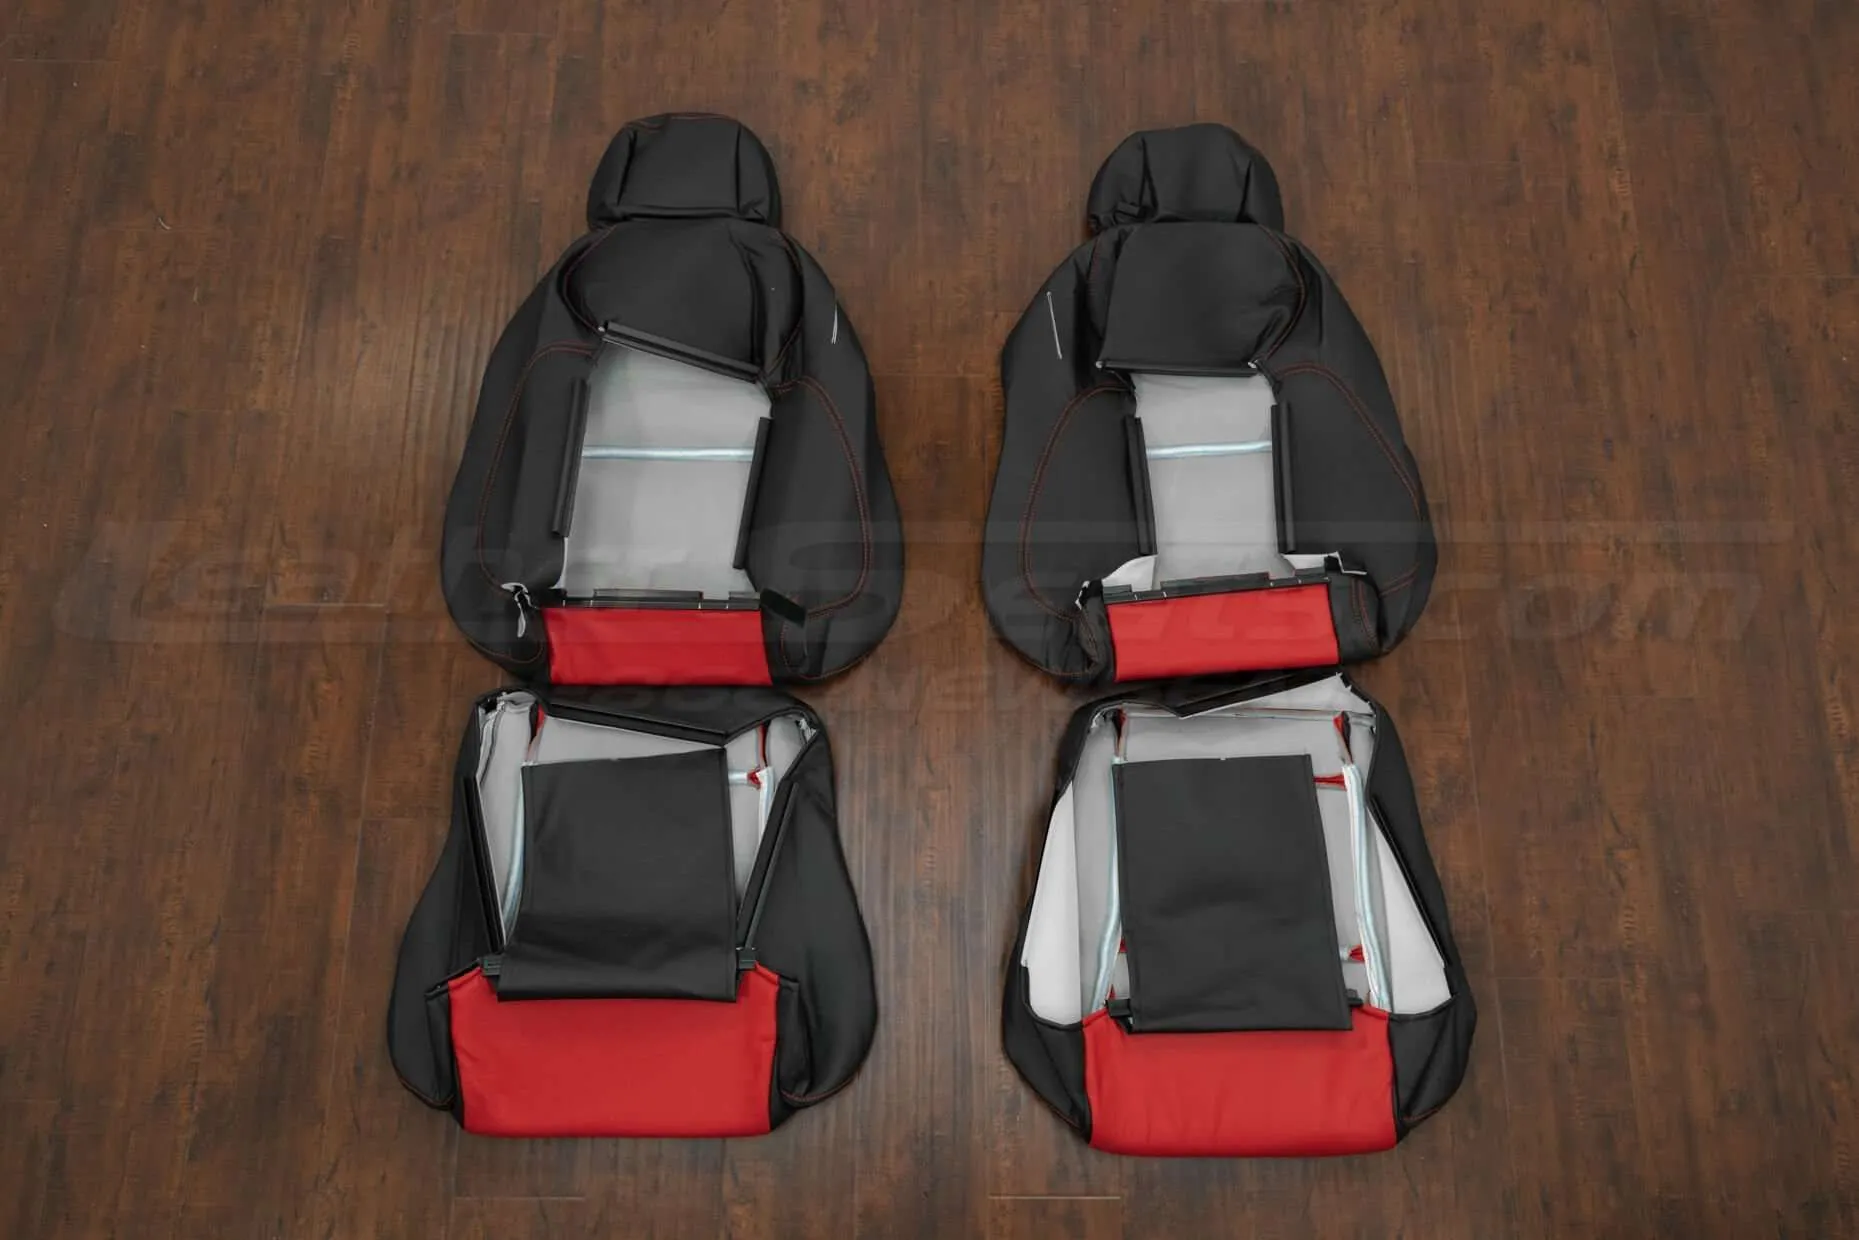 04-06 Pontiac GTO Leather Kit - Black & Bright Red - Back of front seats